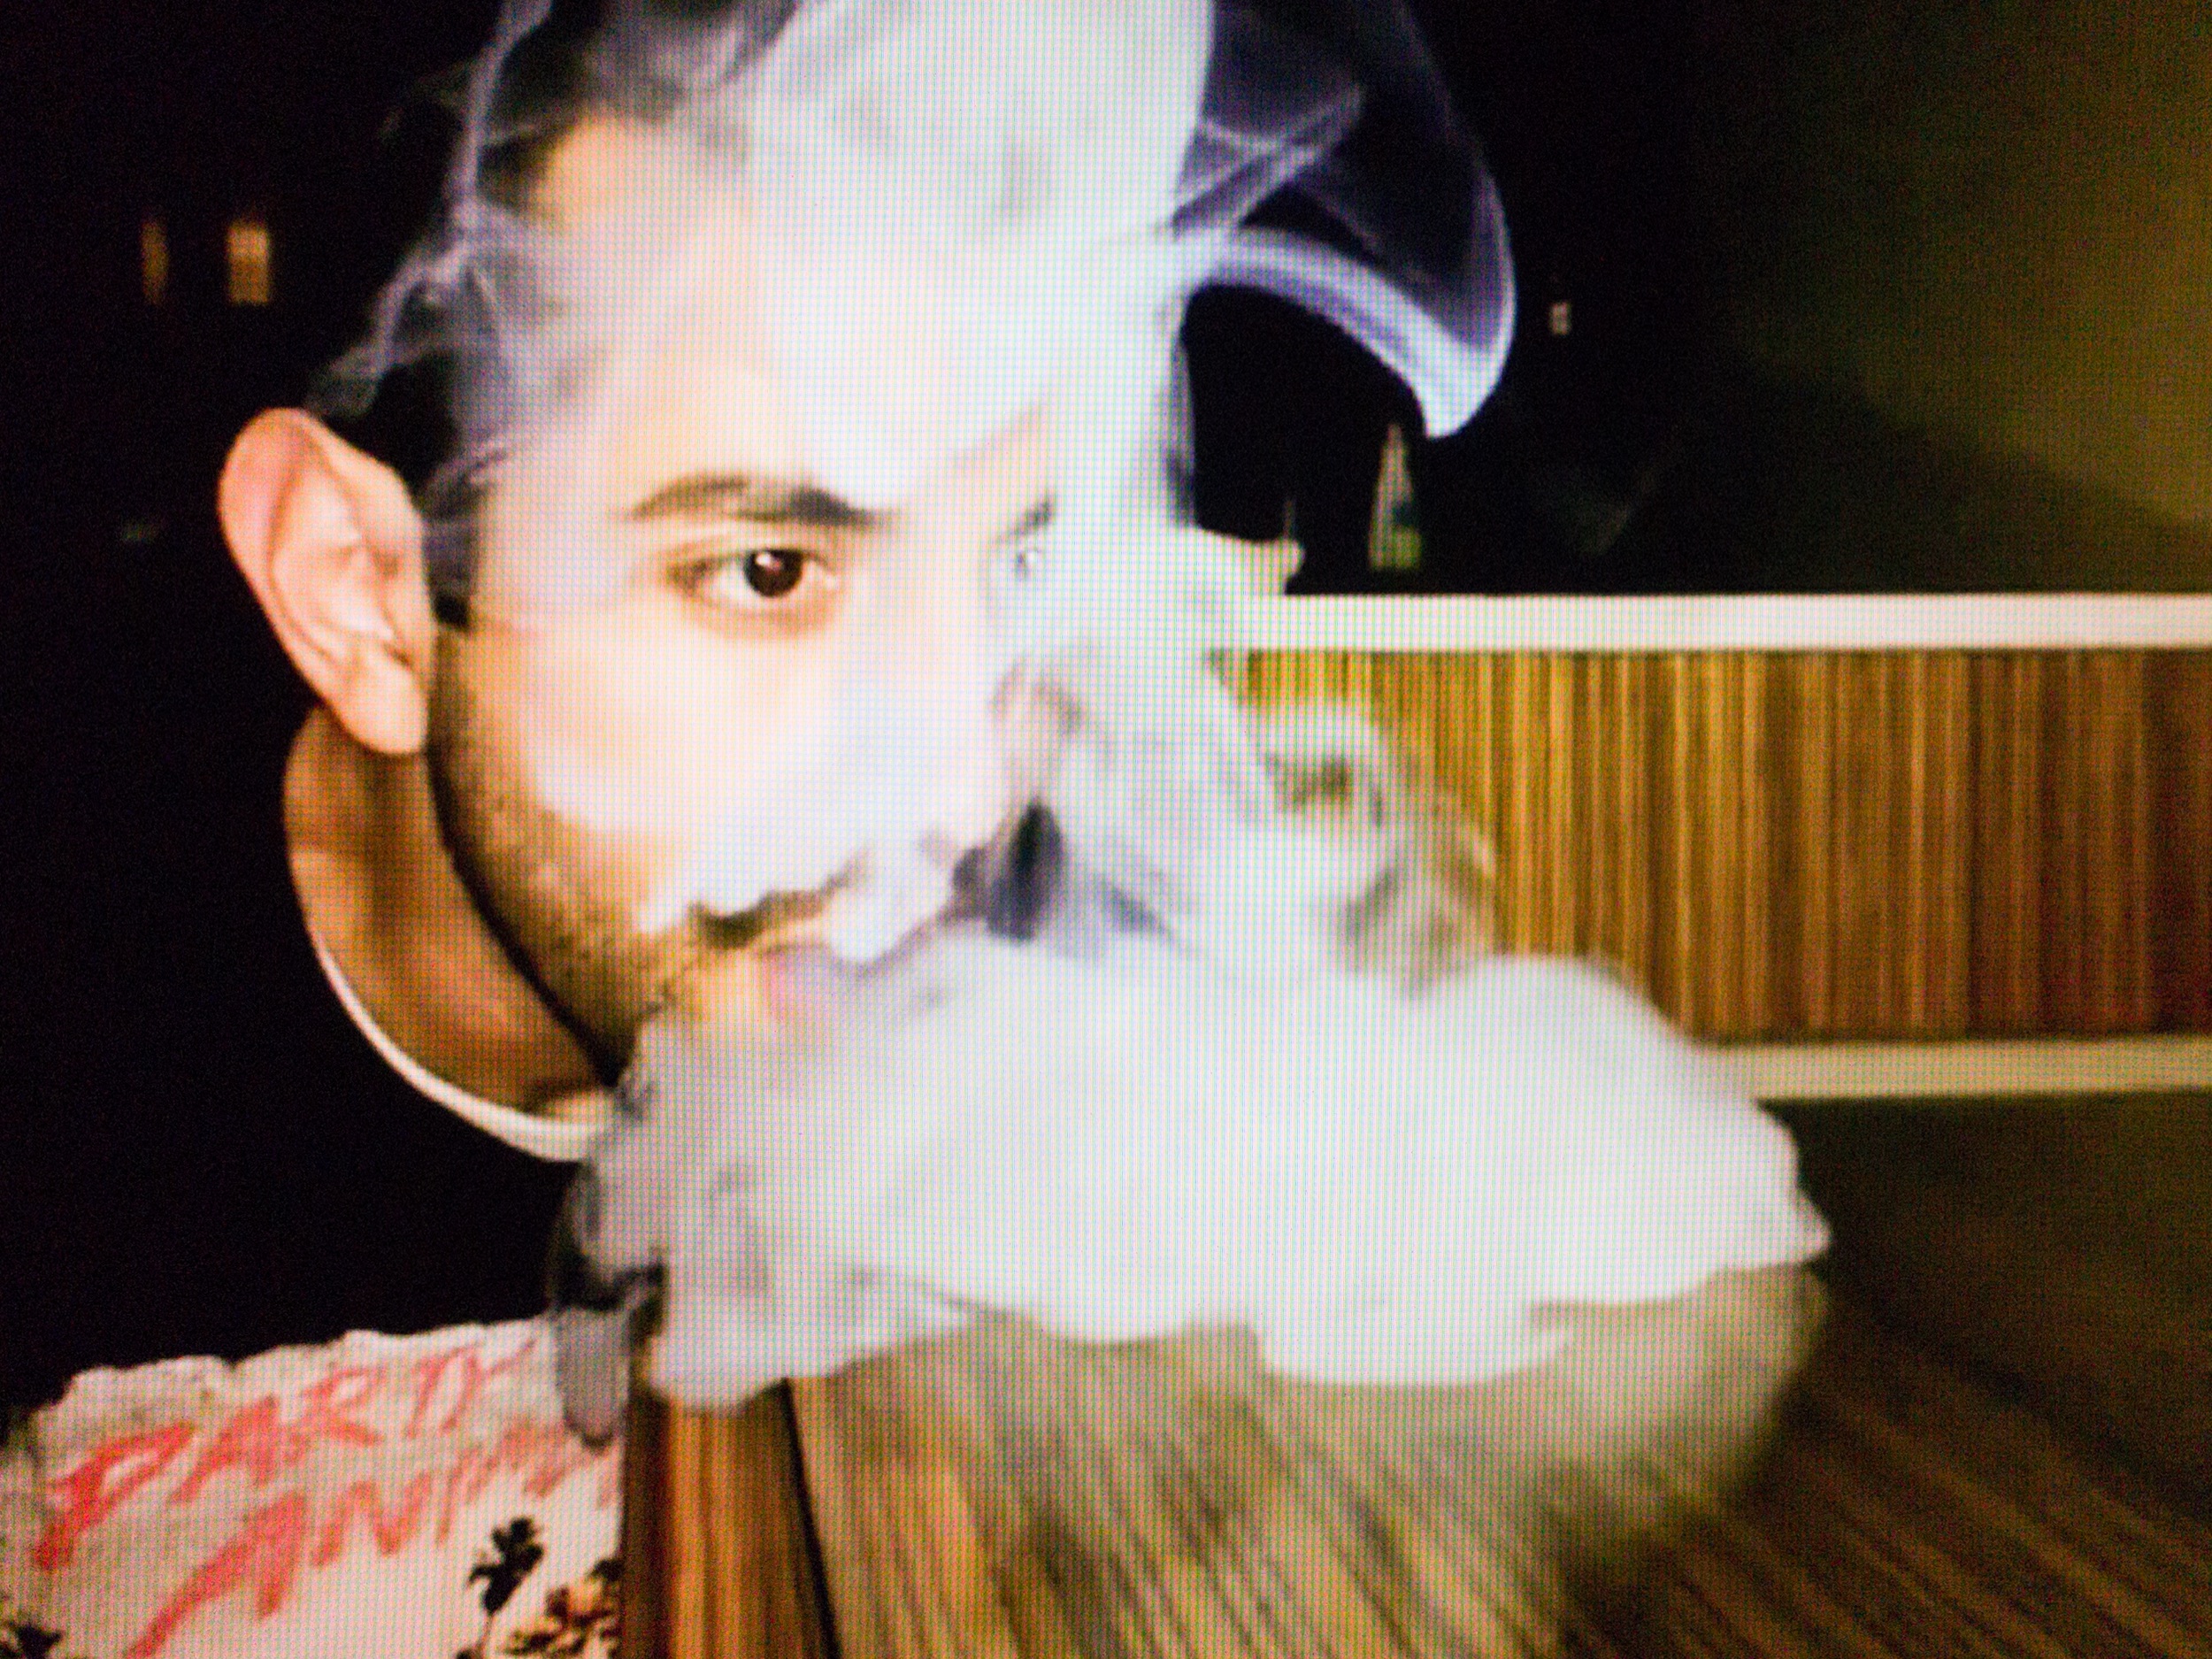 A scruffy young man wearing a ”party animal” t-shirt in a darkened room is slowly blowing smoke onto table, where it builds up.